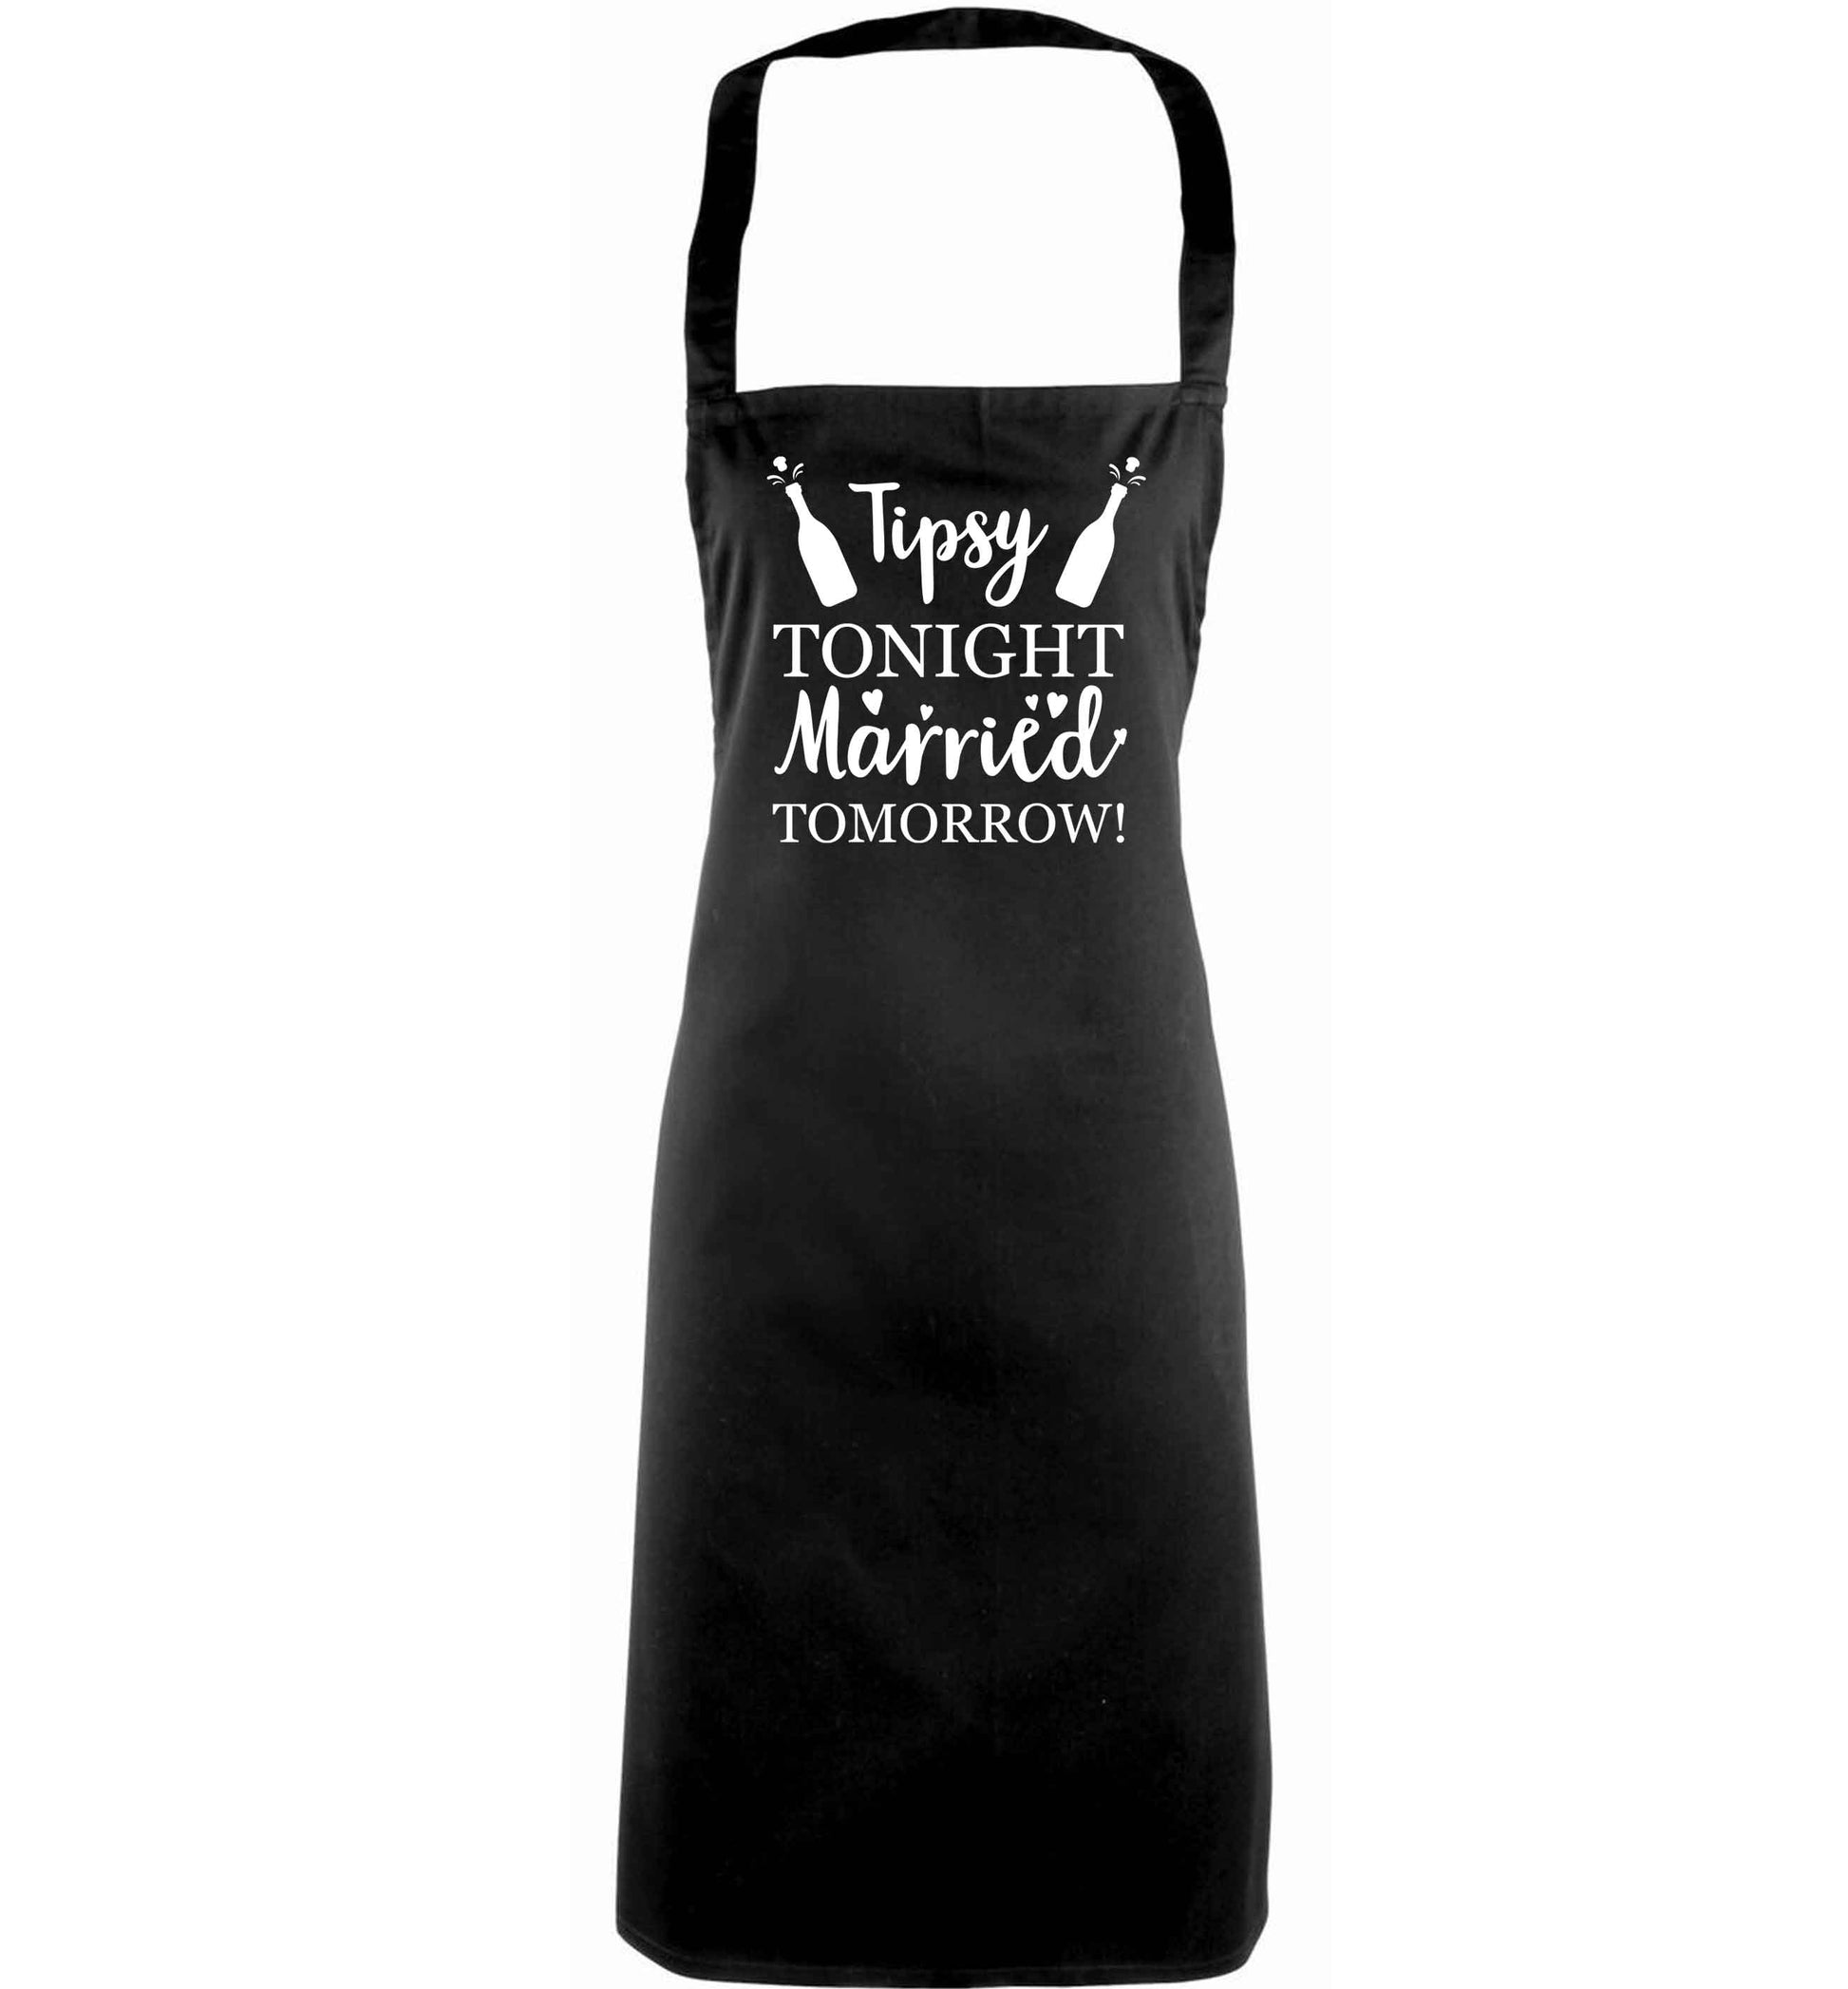 Personalised wedding thank you's Mr and Mrs wedding and date! Ideal wedding favours! adults black apron